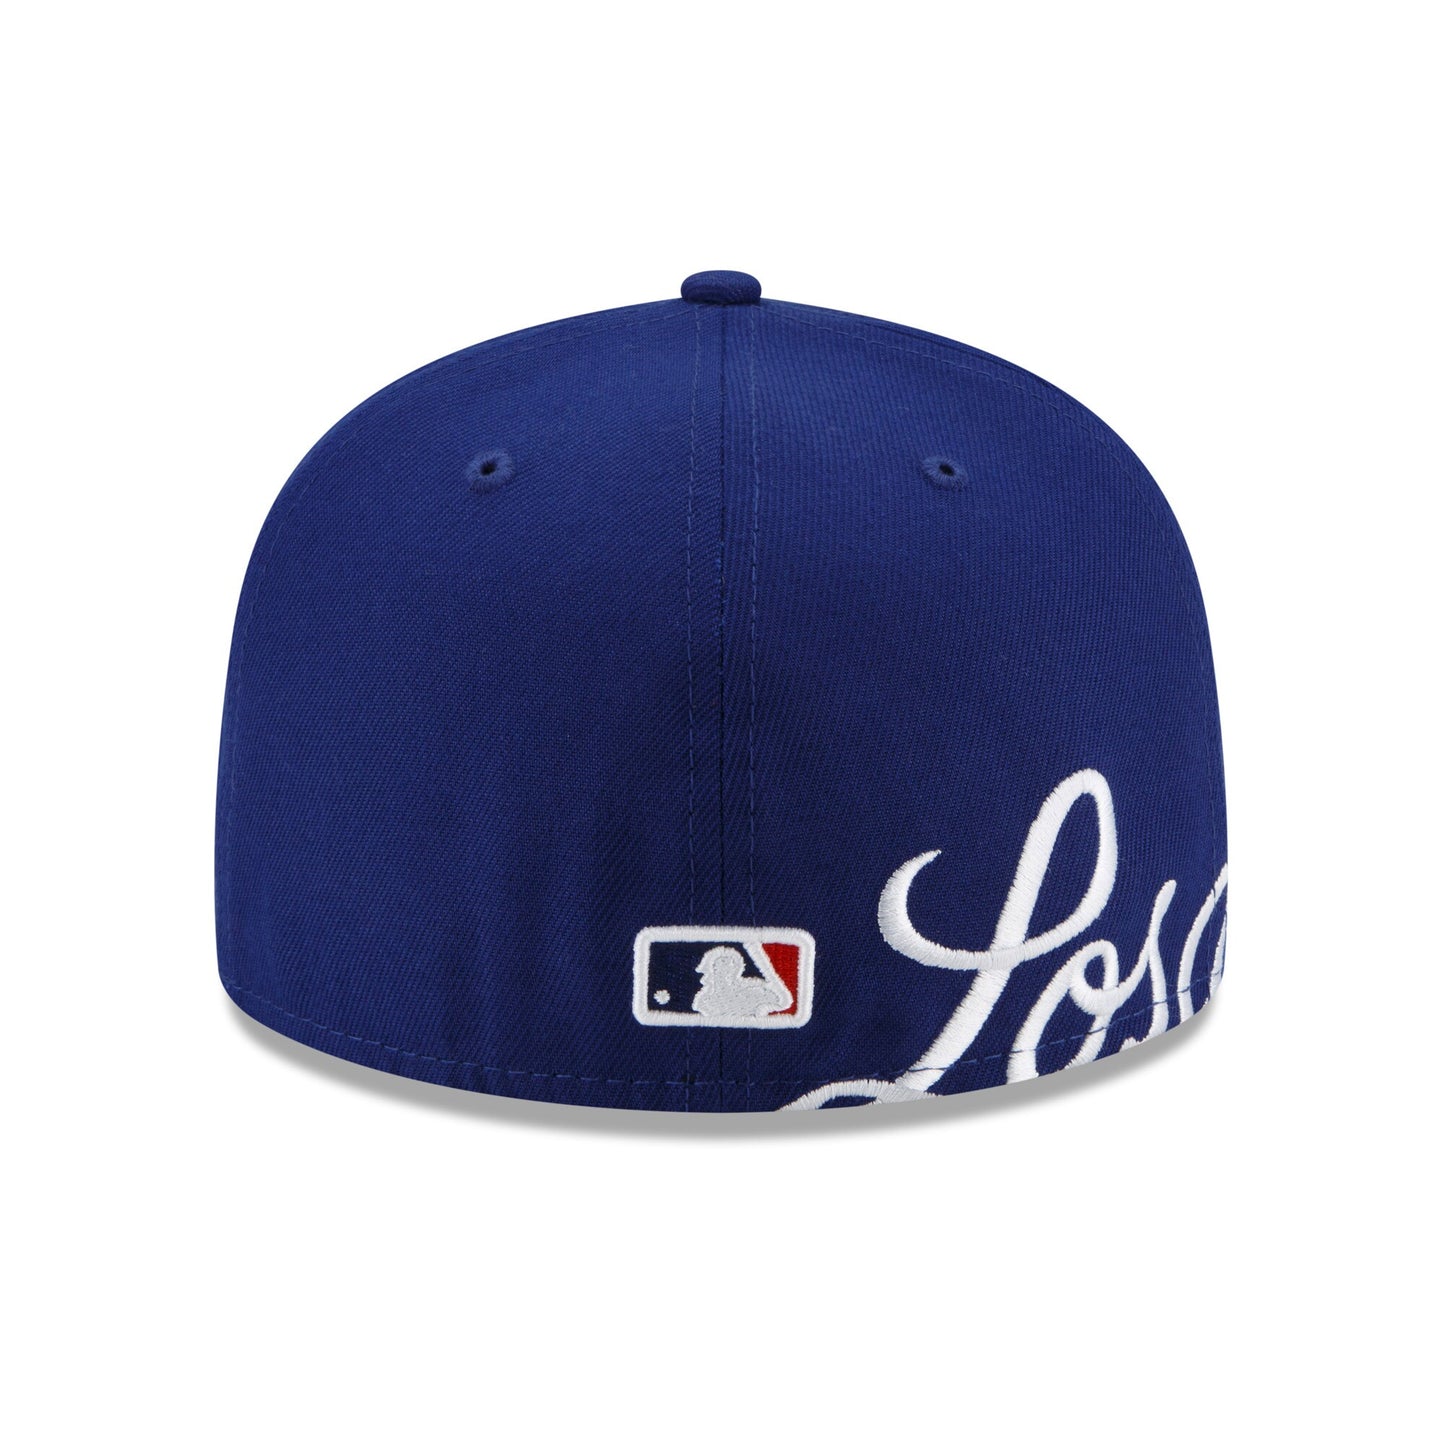 Men's Los Angeles Dodgers New Era Royal Sidesplit 59FIFTY Fitted Hat